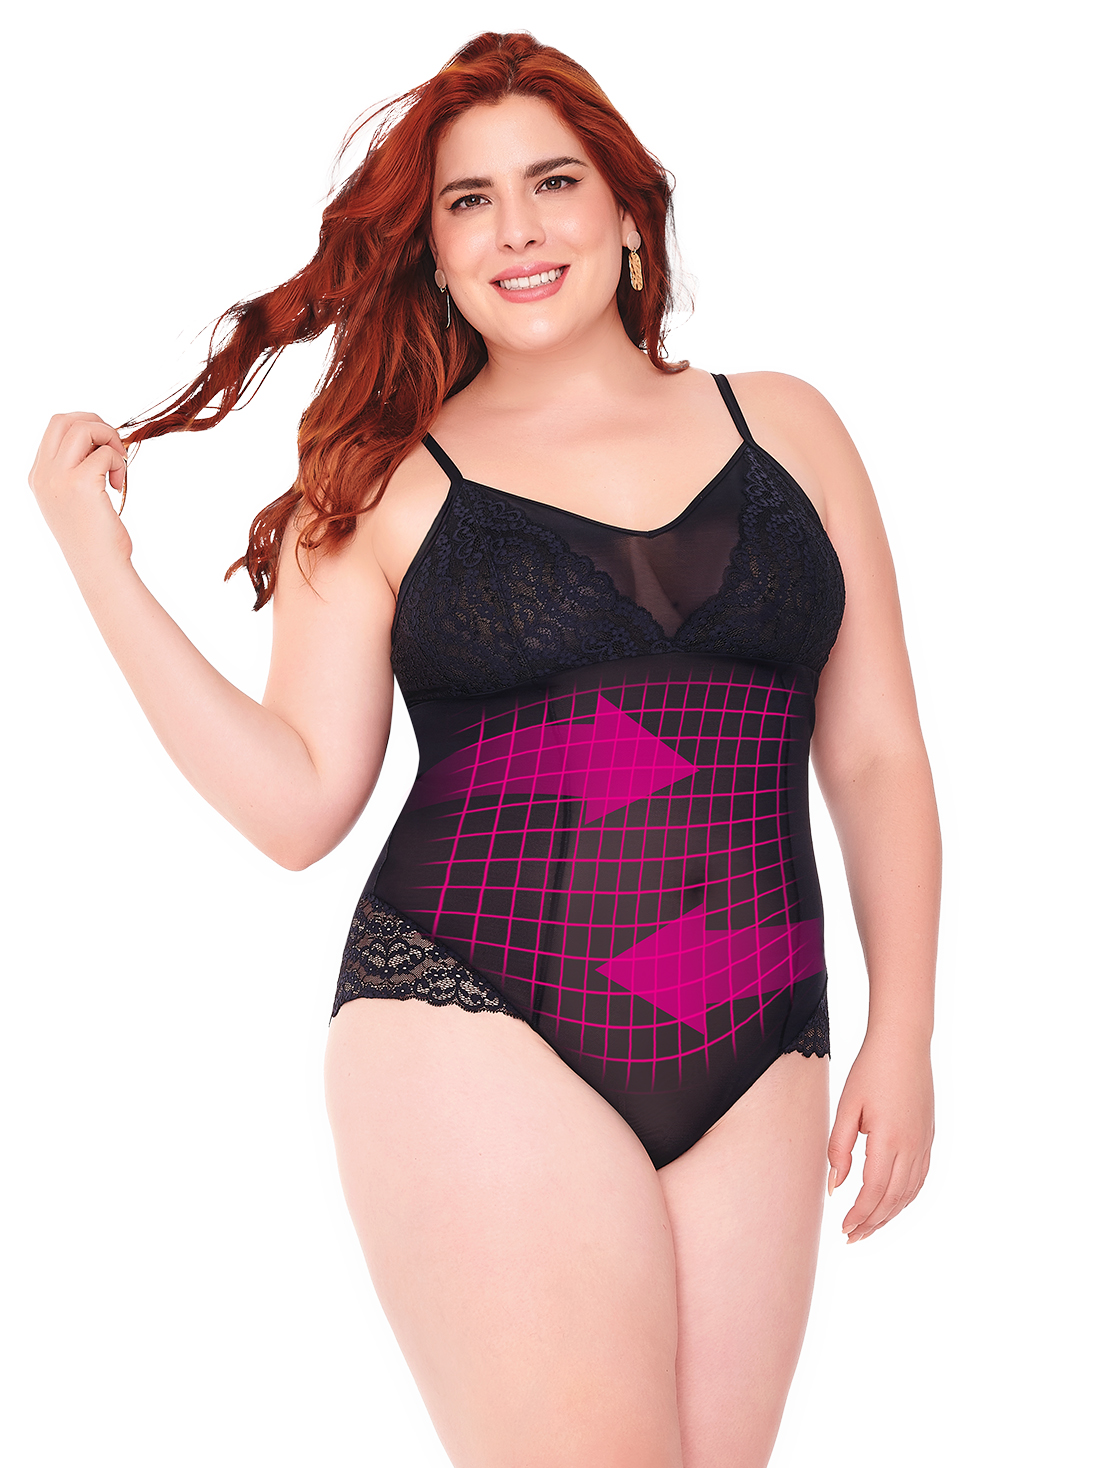 Body reductor firme 74000, NEGRO, hi-res